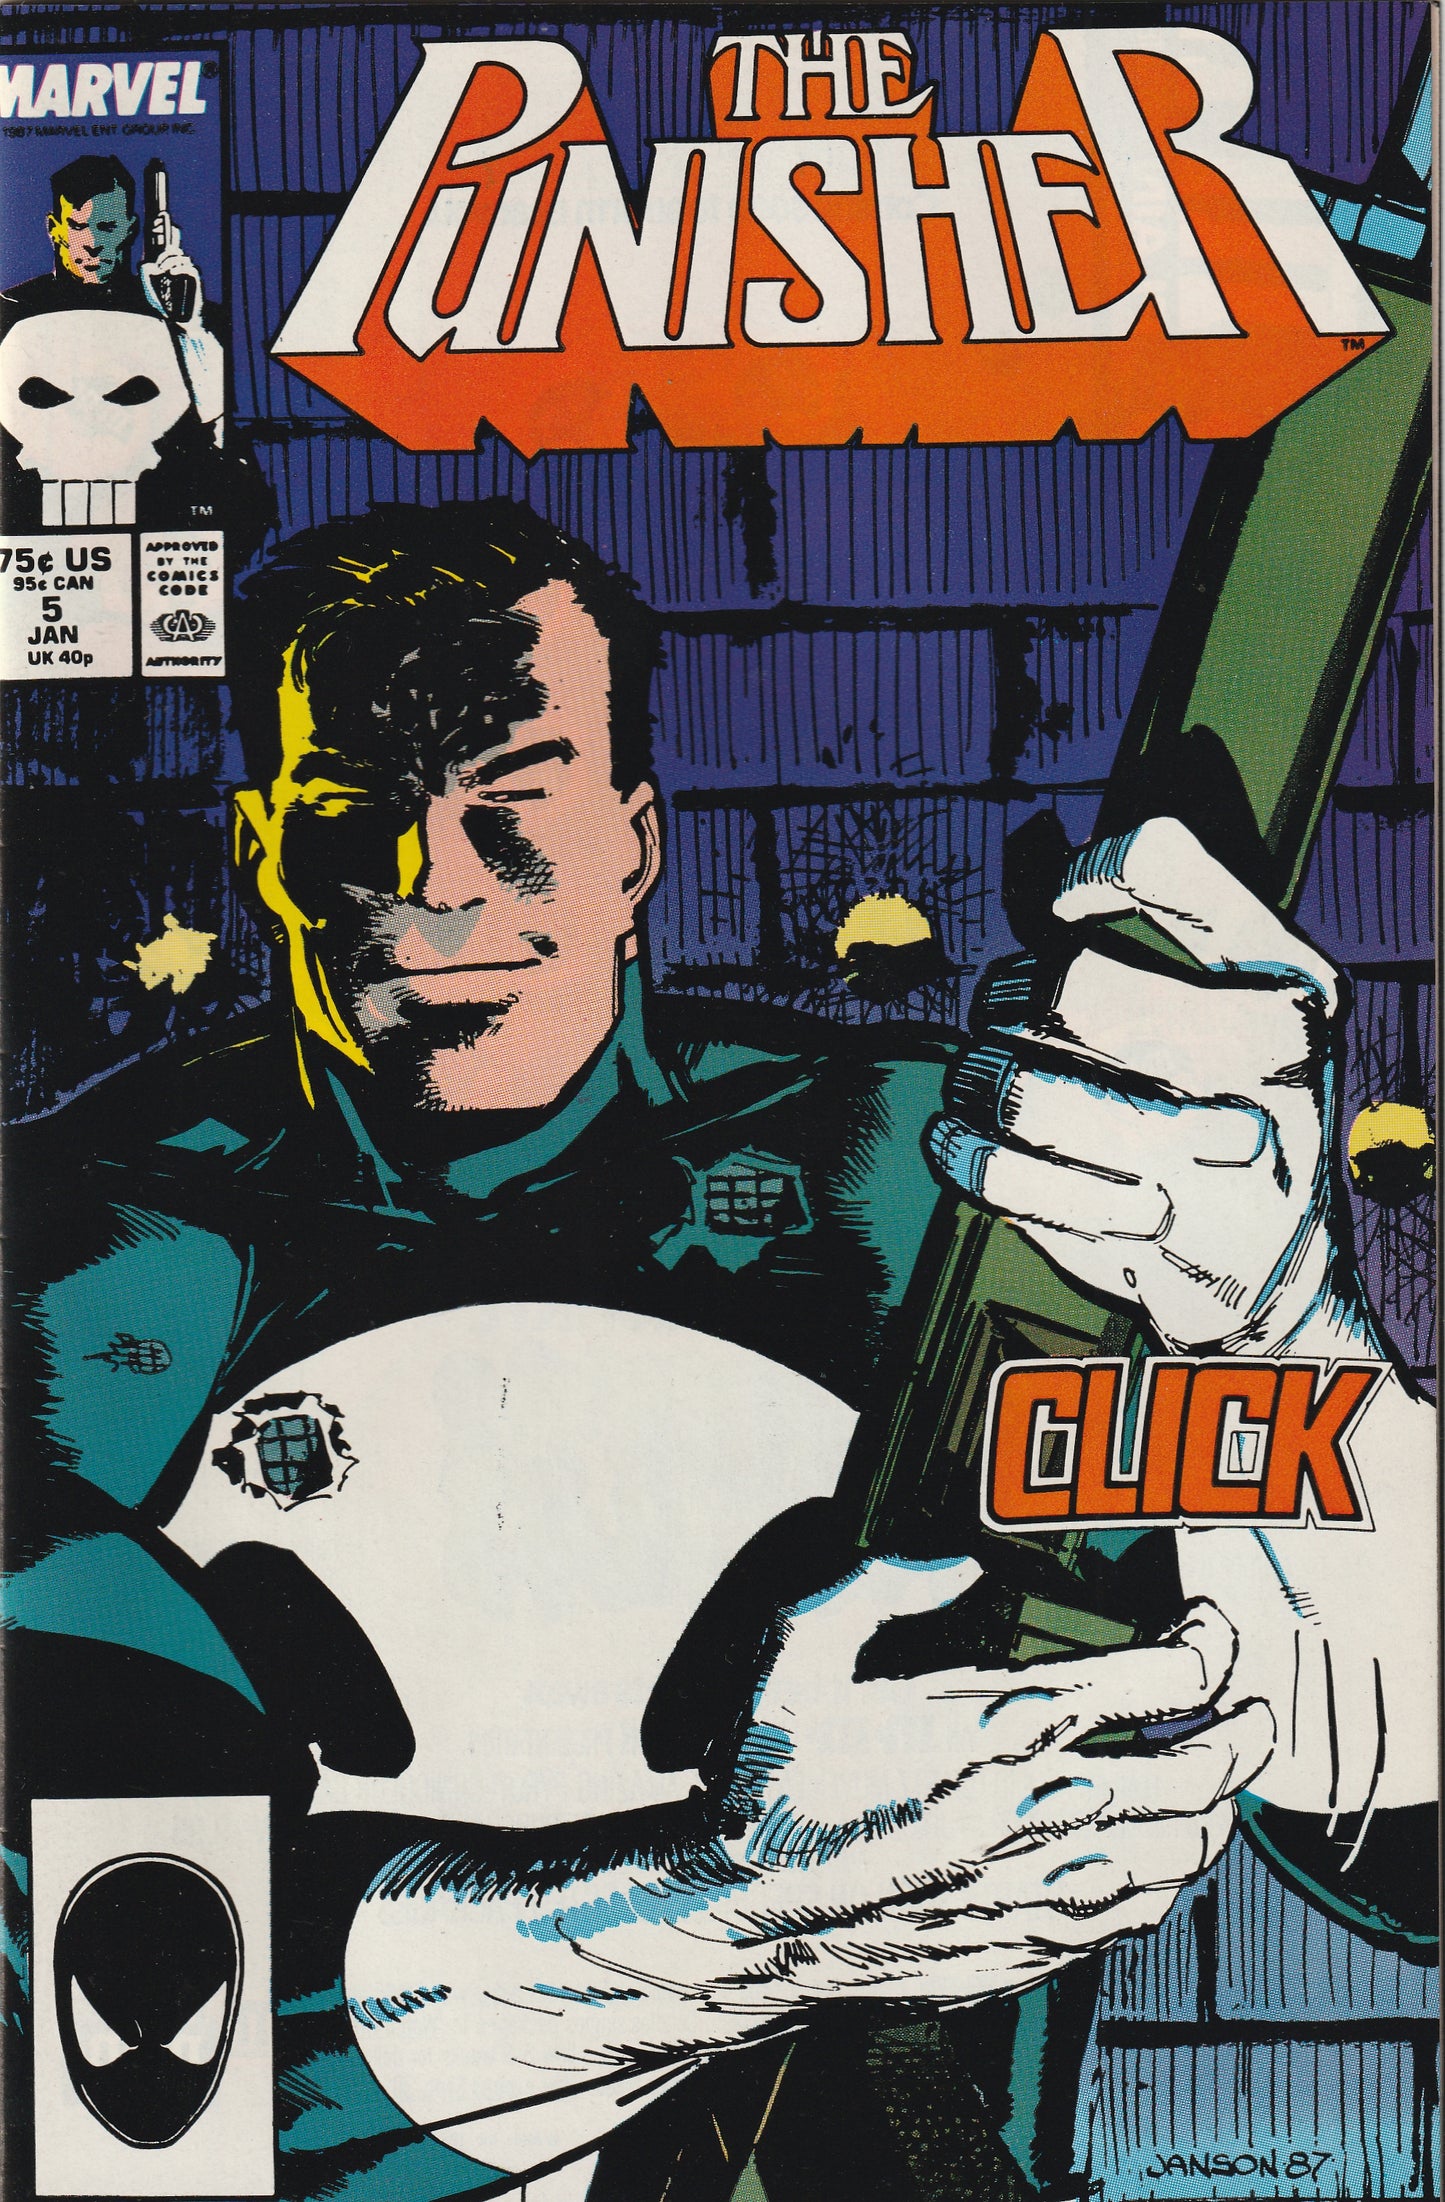 The Punisher #5 (1988)